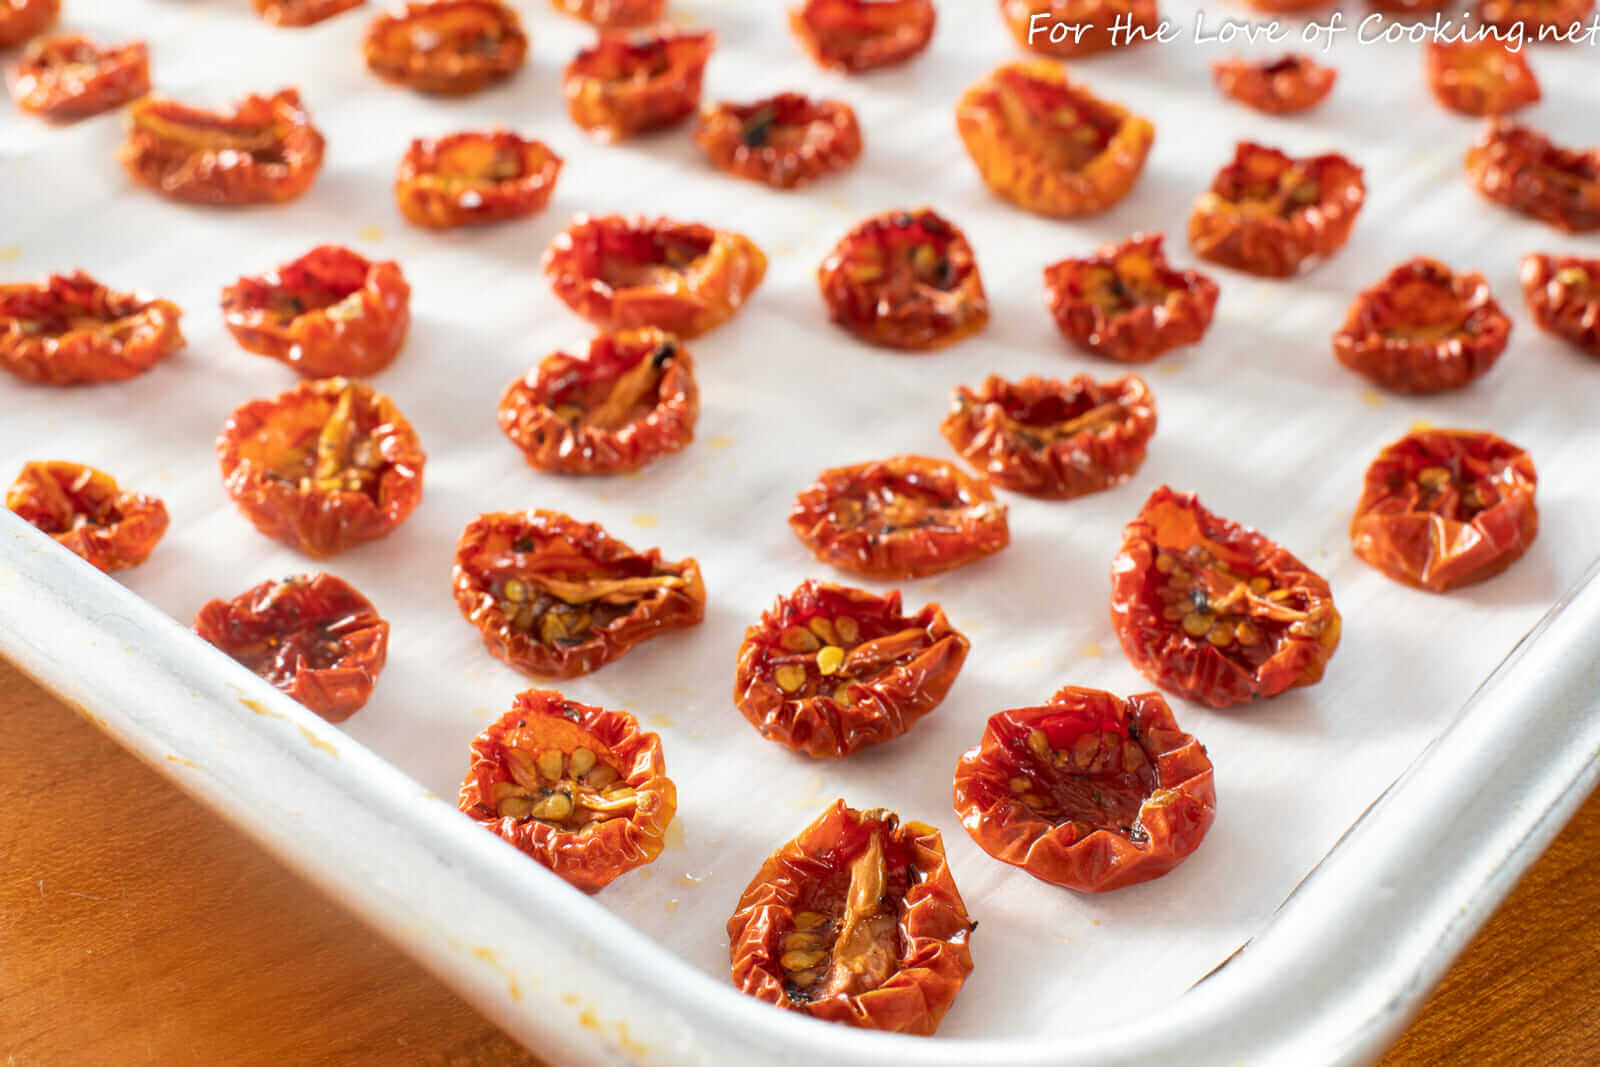 Oven “Sun-Dried” Tomatoes